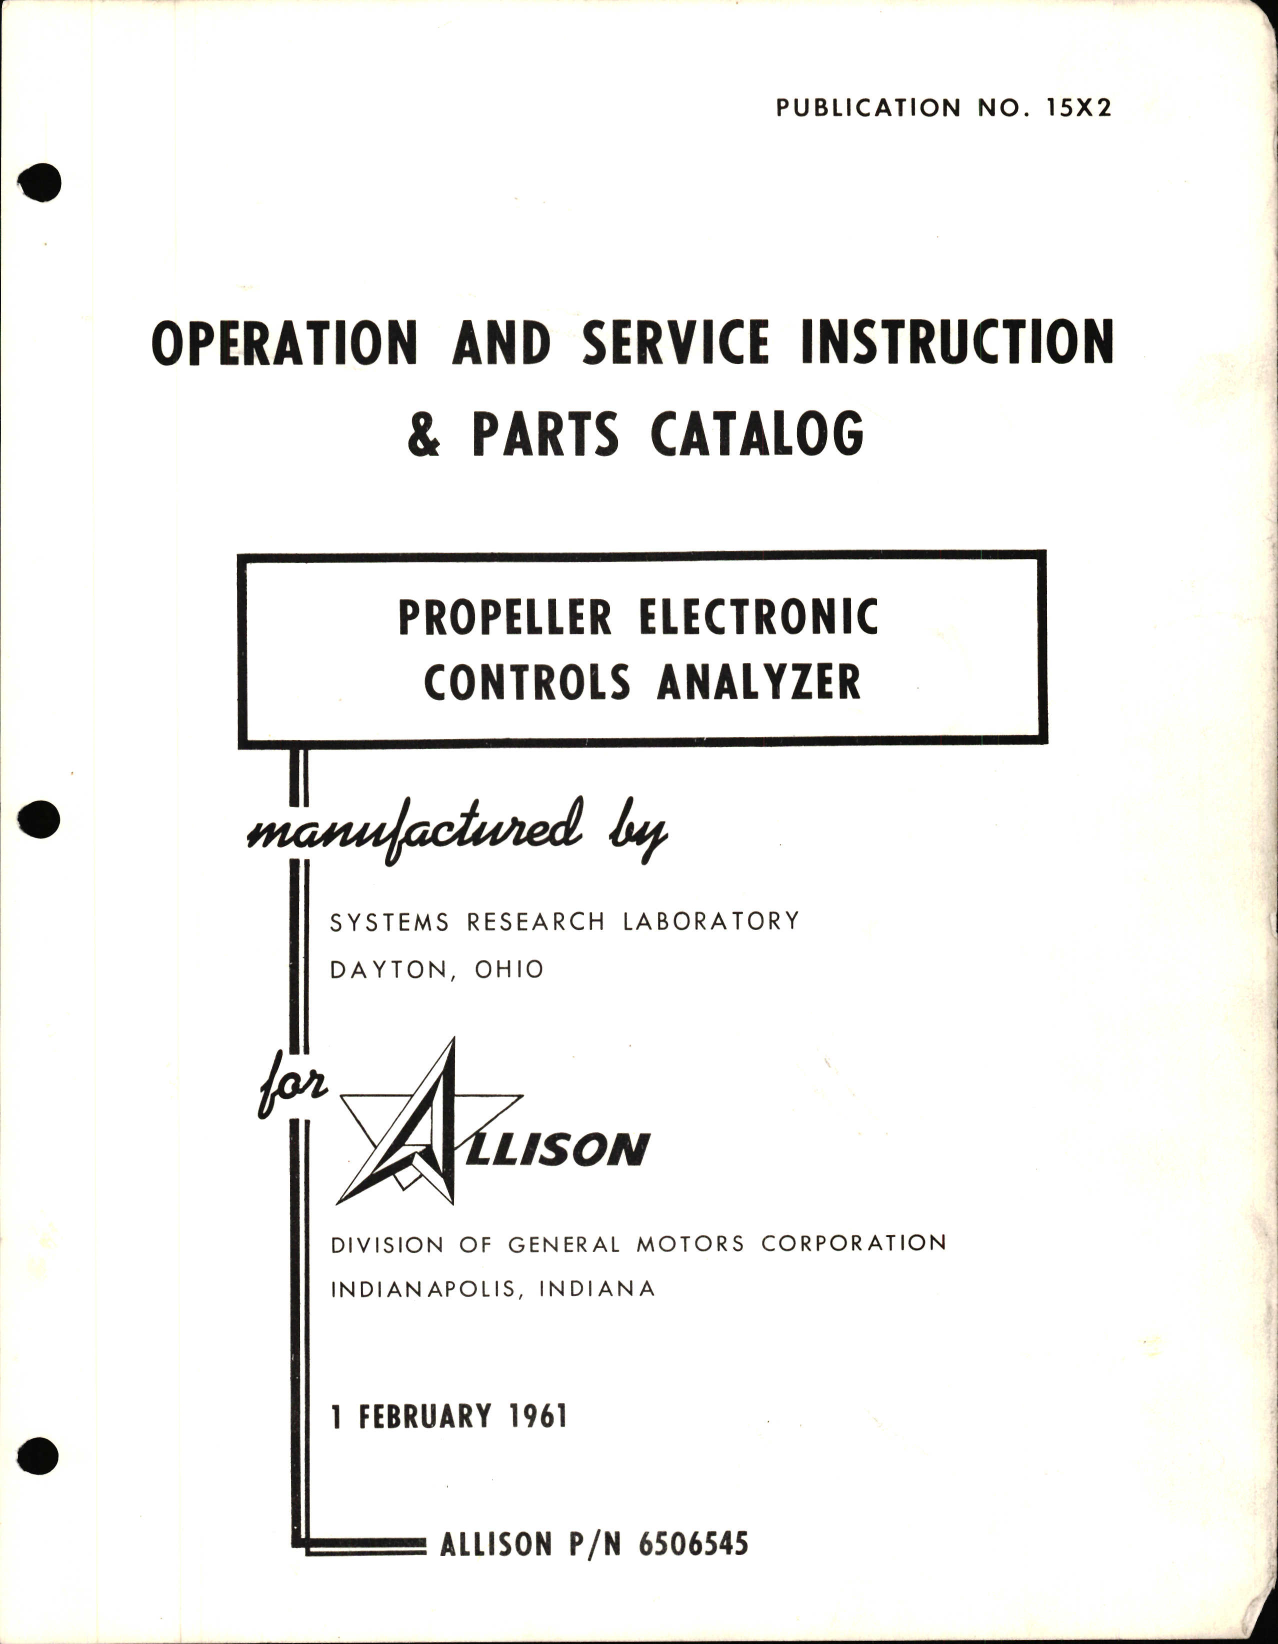 Sample page 1 from AirCorps Library document: Operation & Service Instruction & Parts Catalog for Propeller Electronic Control Analyzer